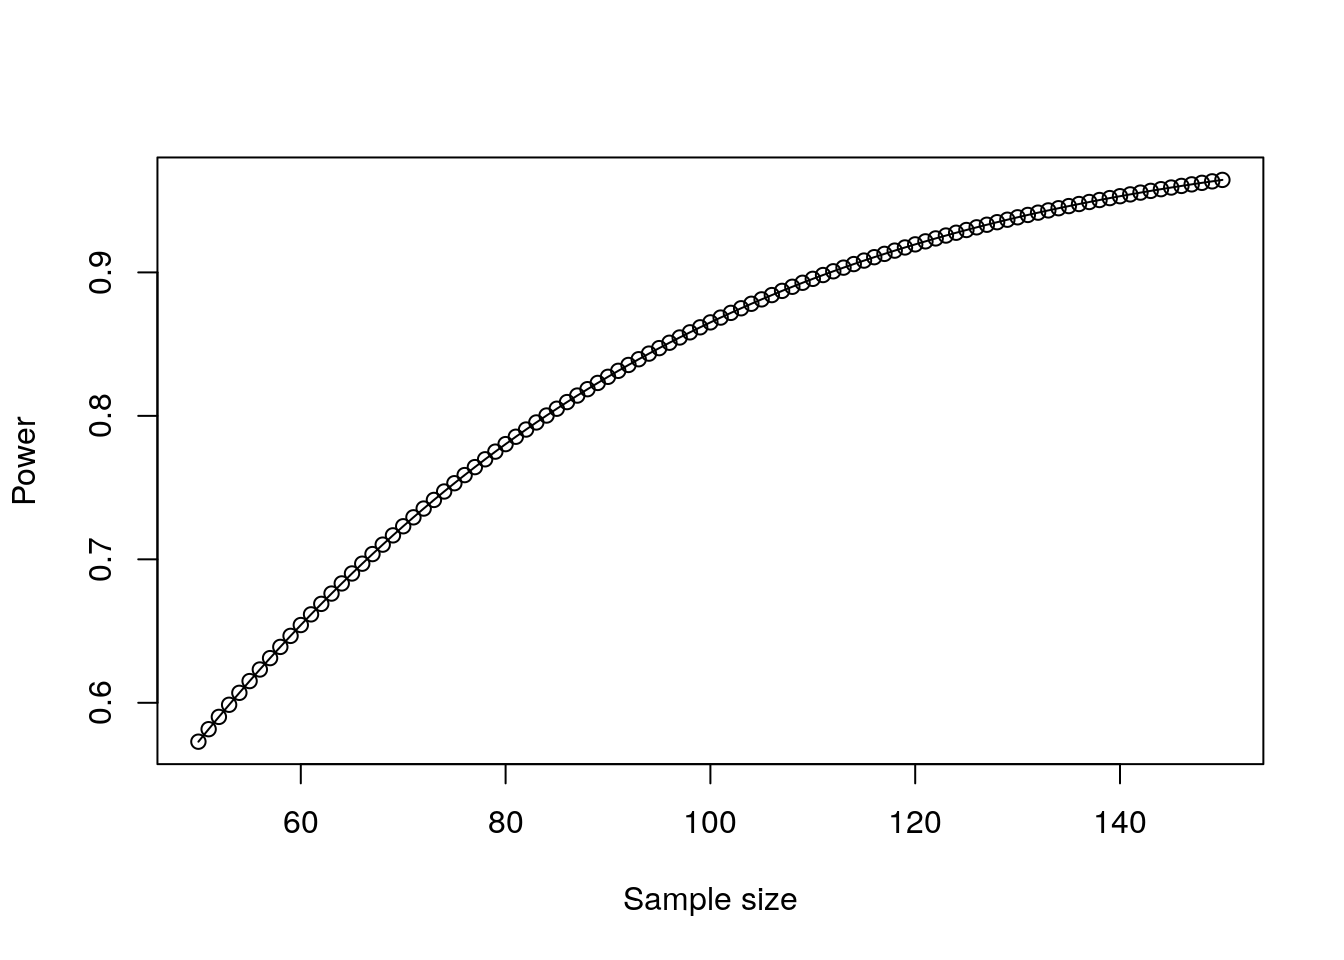 Plot of power against sample size for a correlation test